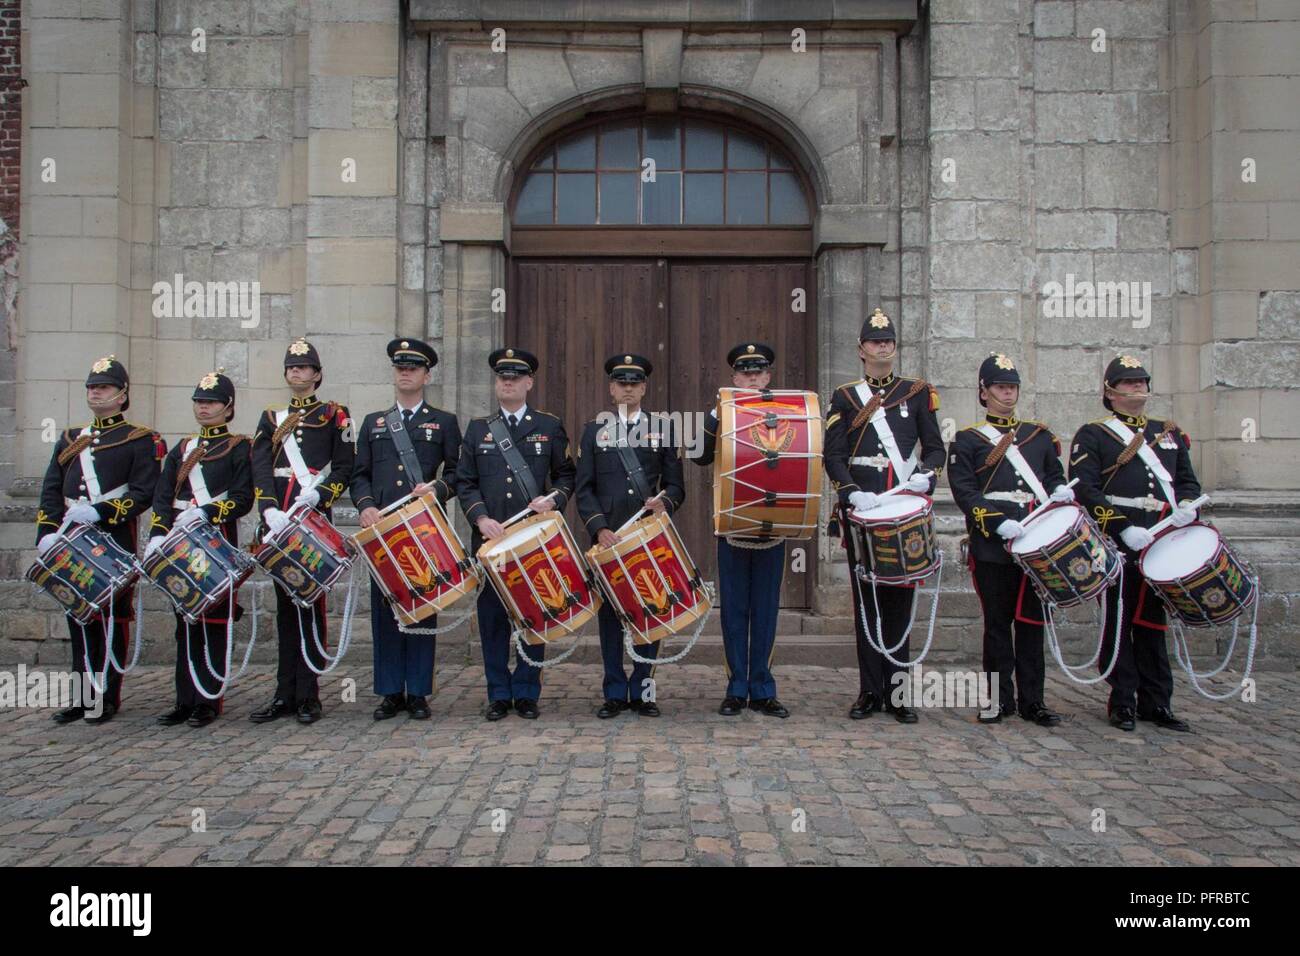 US Army Europe Band drummers stand alongside the drummers of the Royal Logistics Corps at the Citadelle 350 anniversary military show, May 25, 2018, Lille, France.  US Army Stock Photo